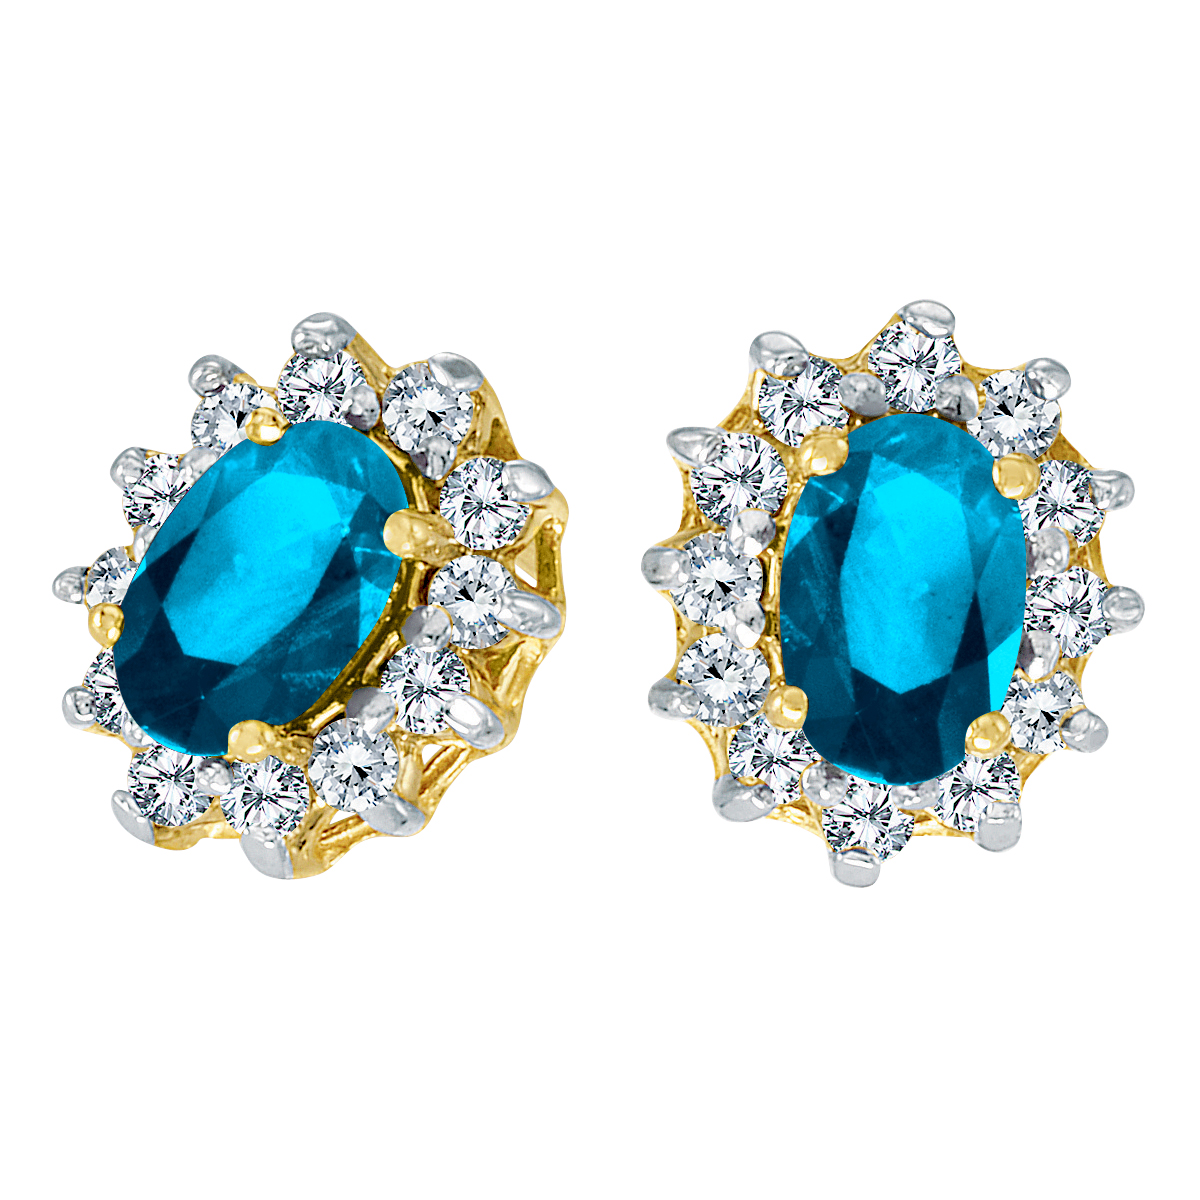 Details about   14k Yellow Gold Prong Set Natural Oval Blue Topaz Ladies Elegant Earrings 